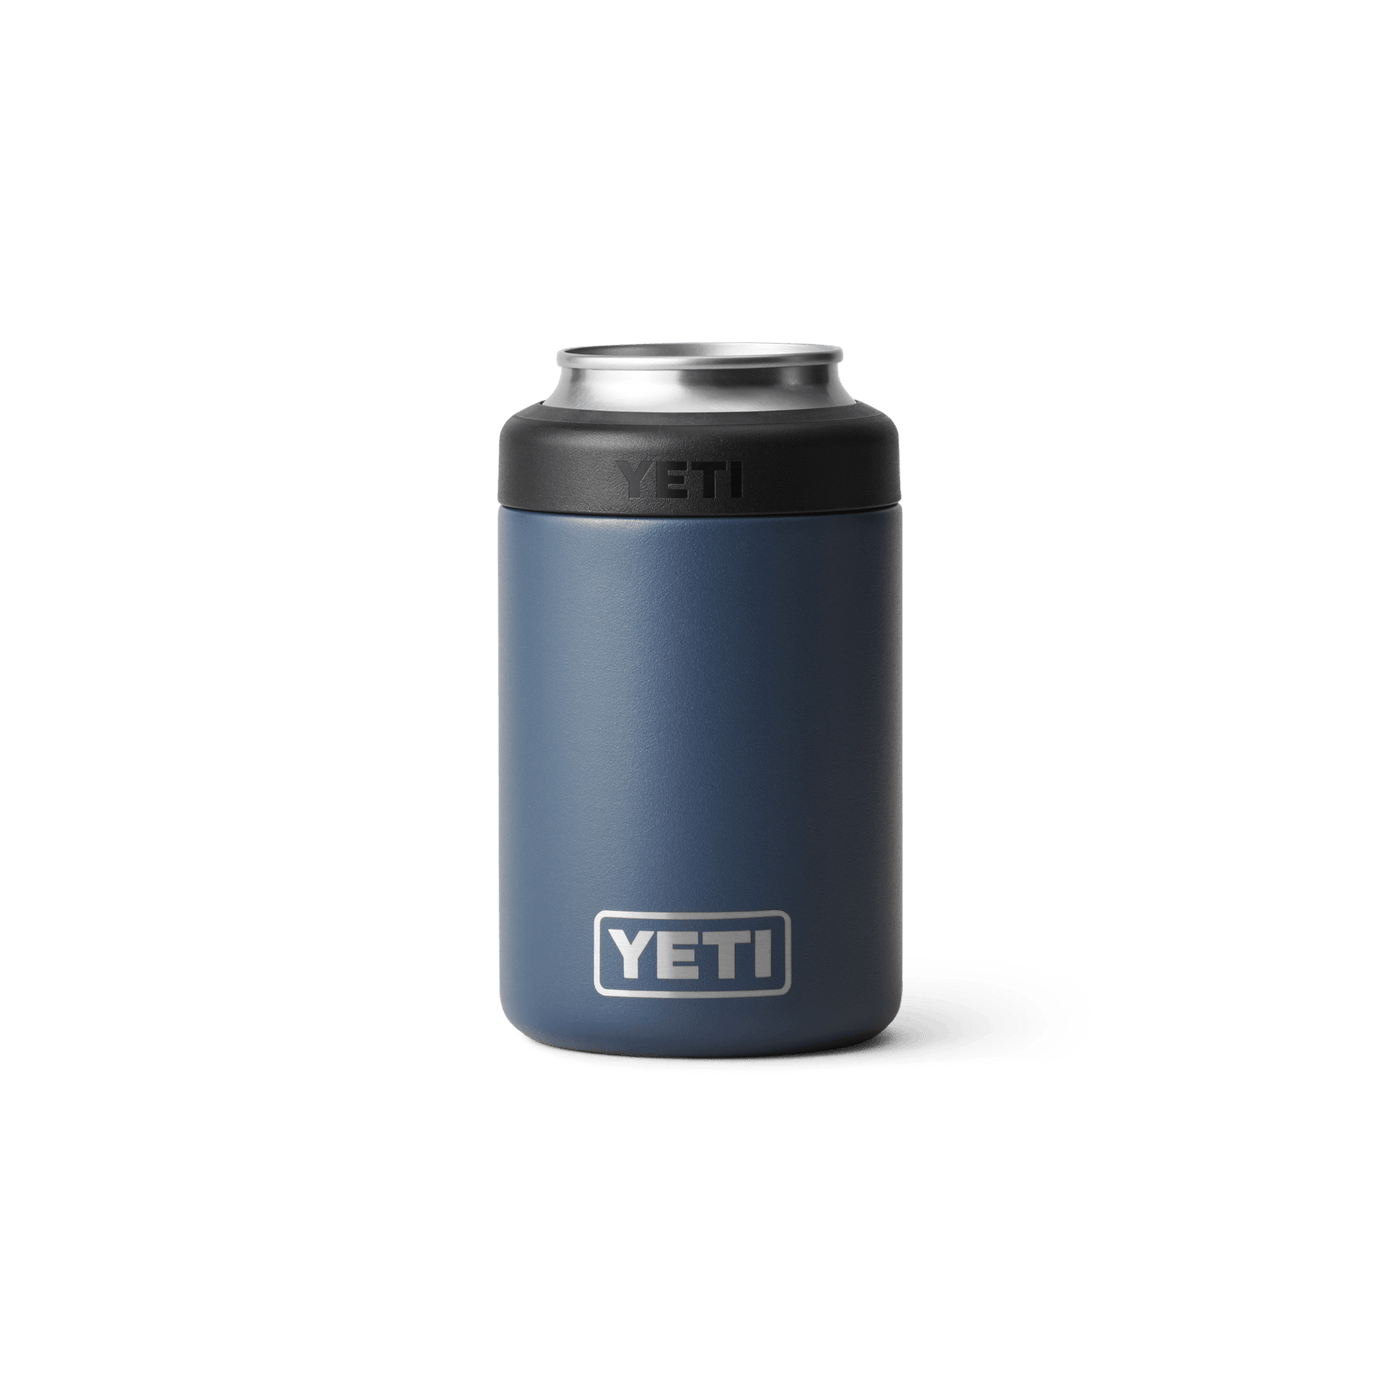 YETI Rambler Colster 2.0 - Toronto Maple Leafs - The Hockey Shop Source For Sports